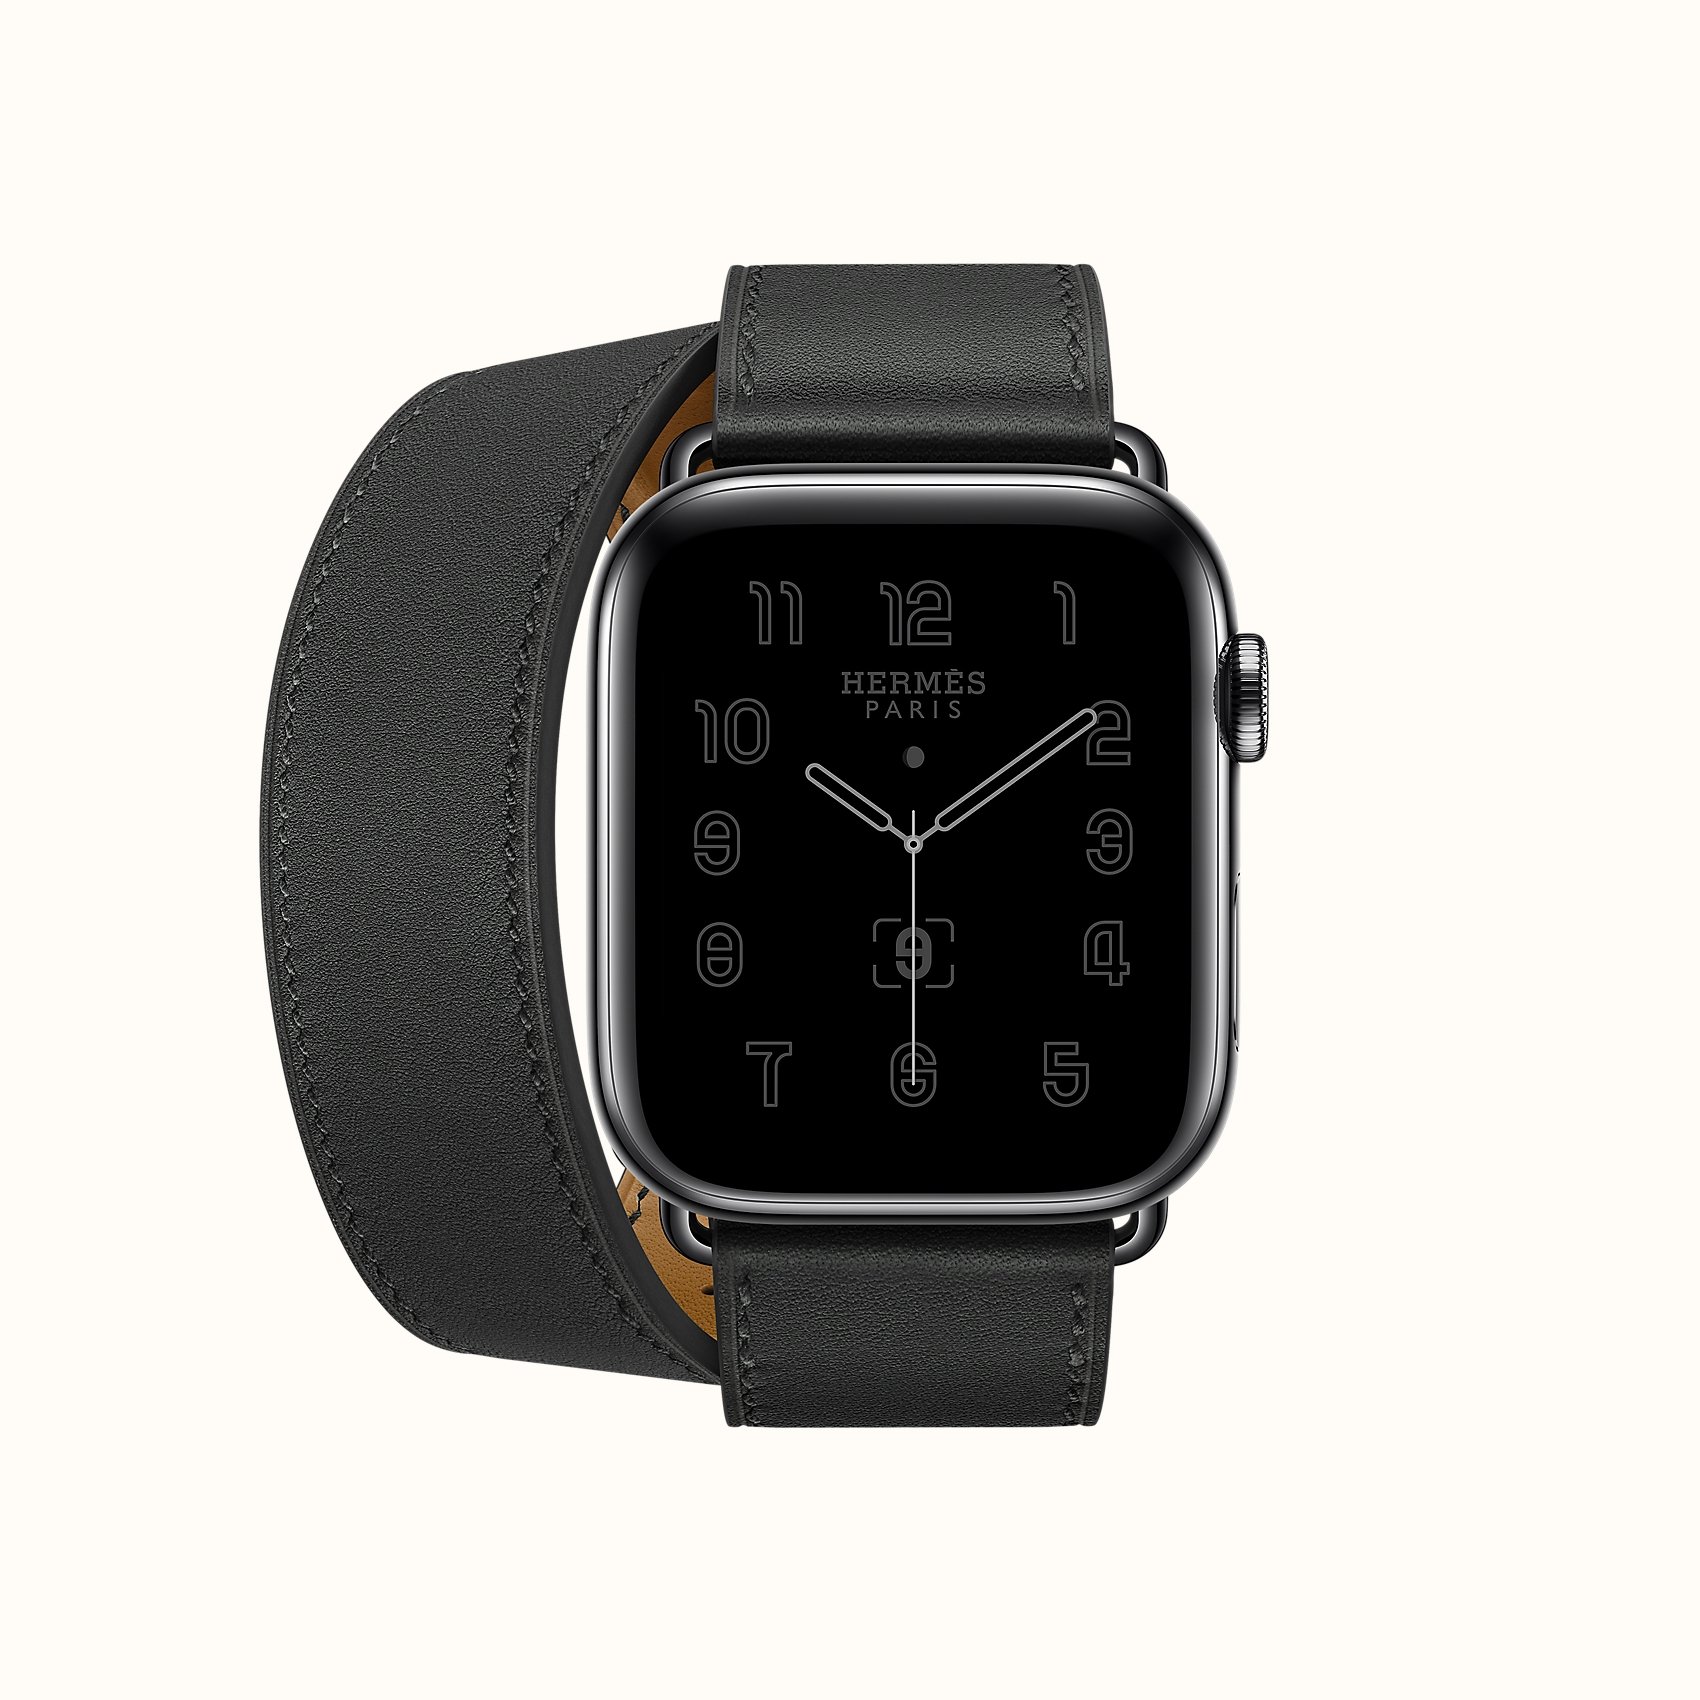 Space Black Series 6 case & Band Apple Watch Hermes Double Tour 44